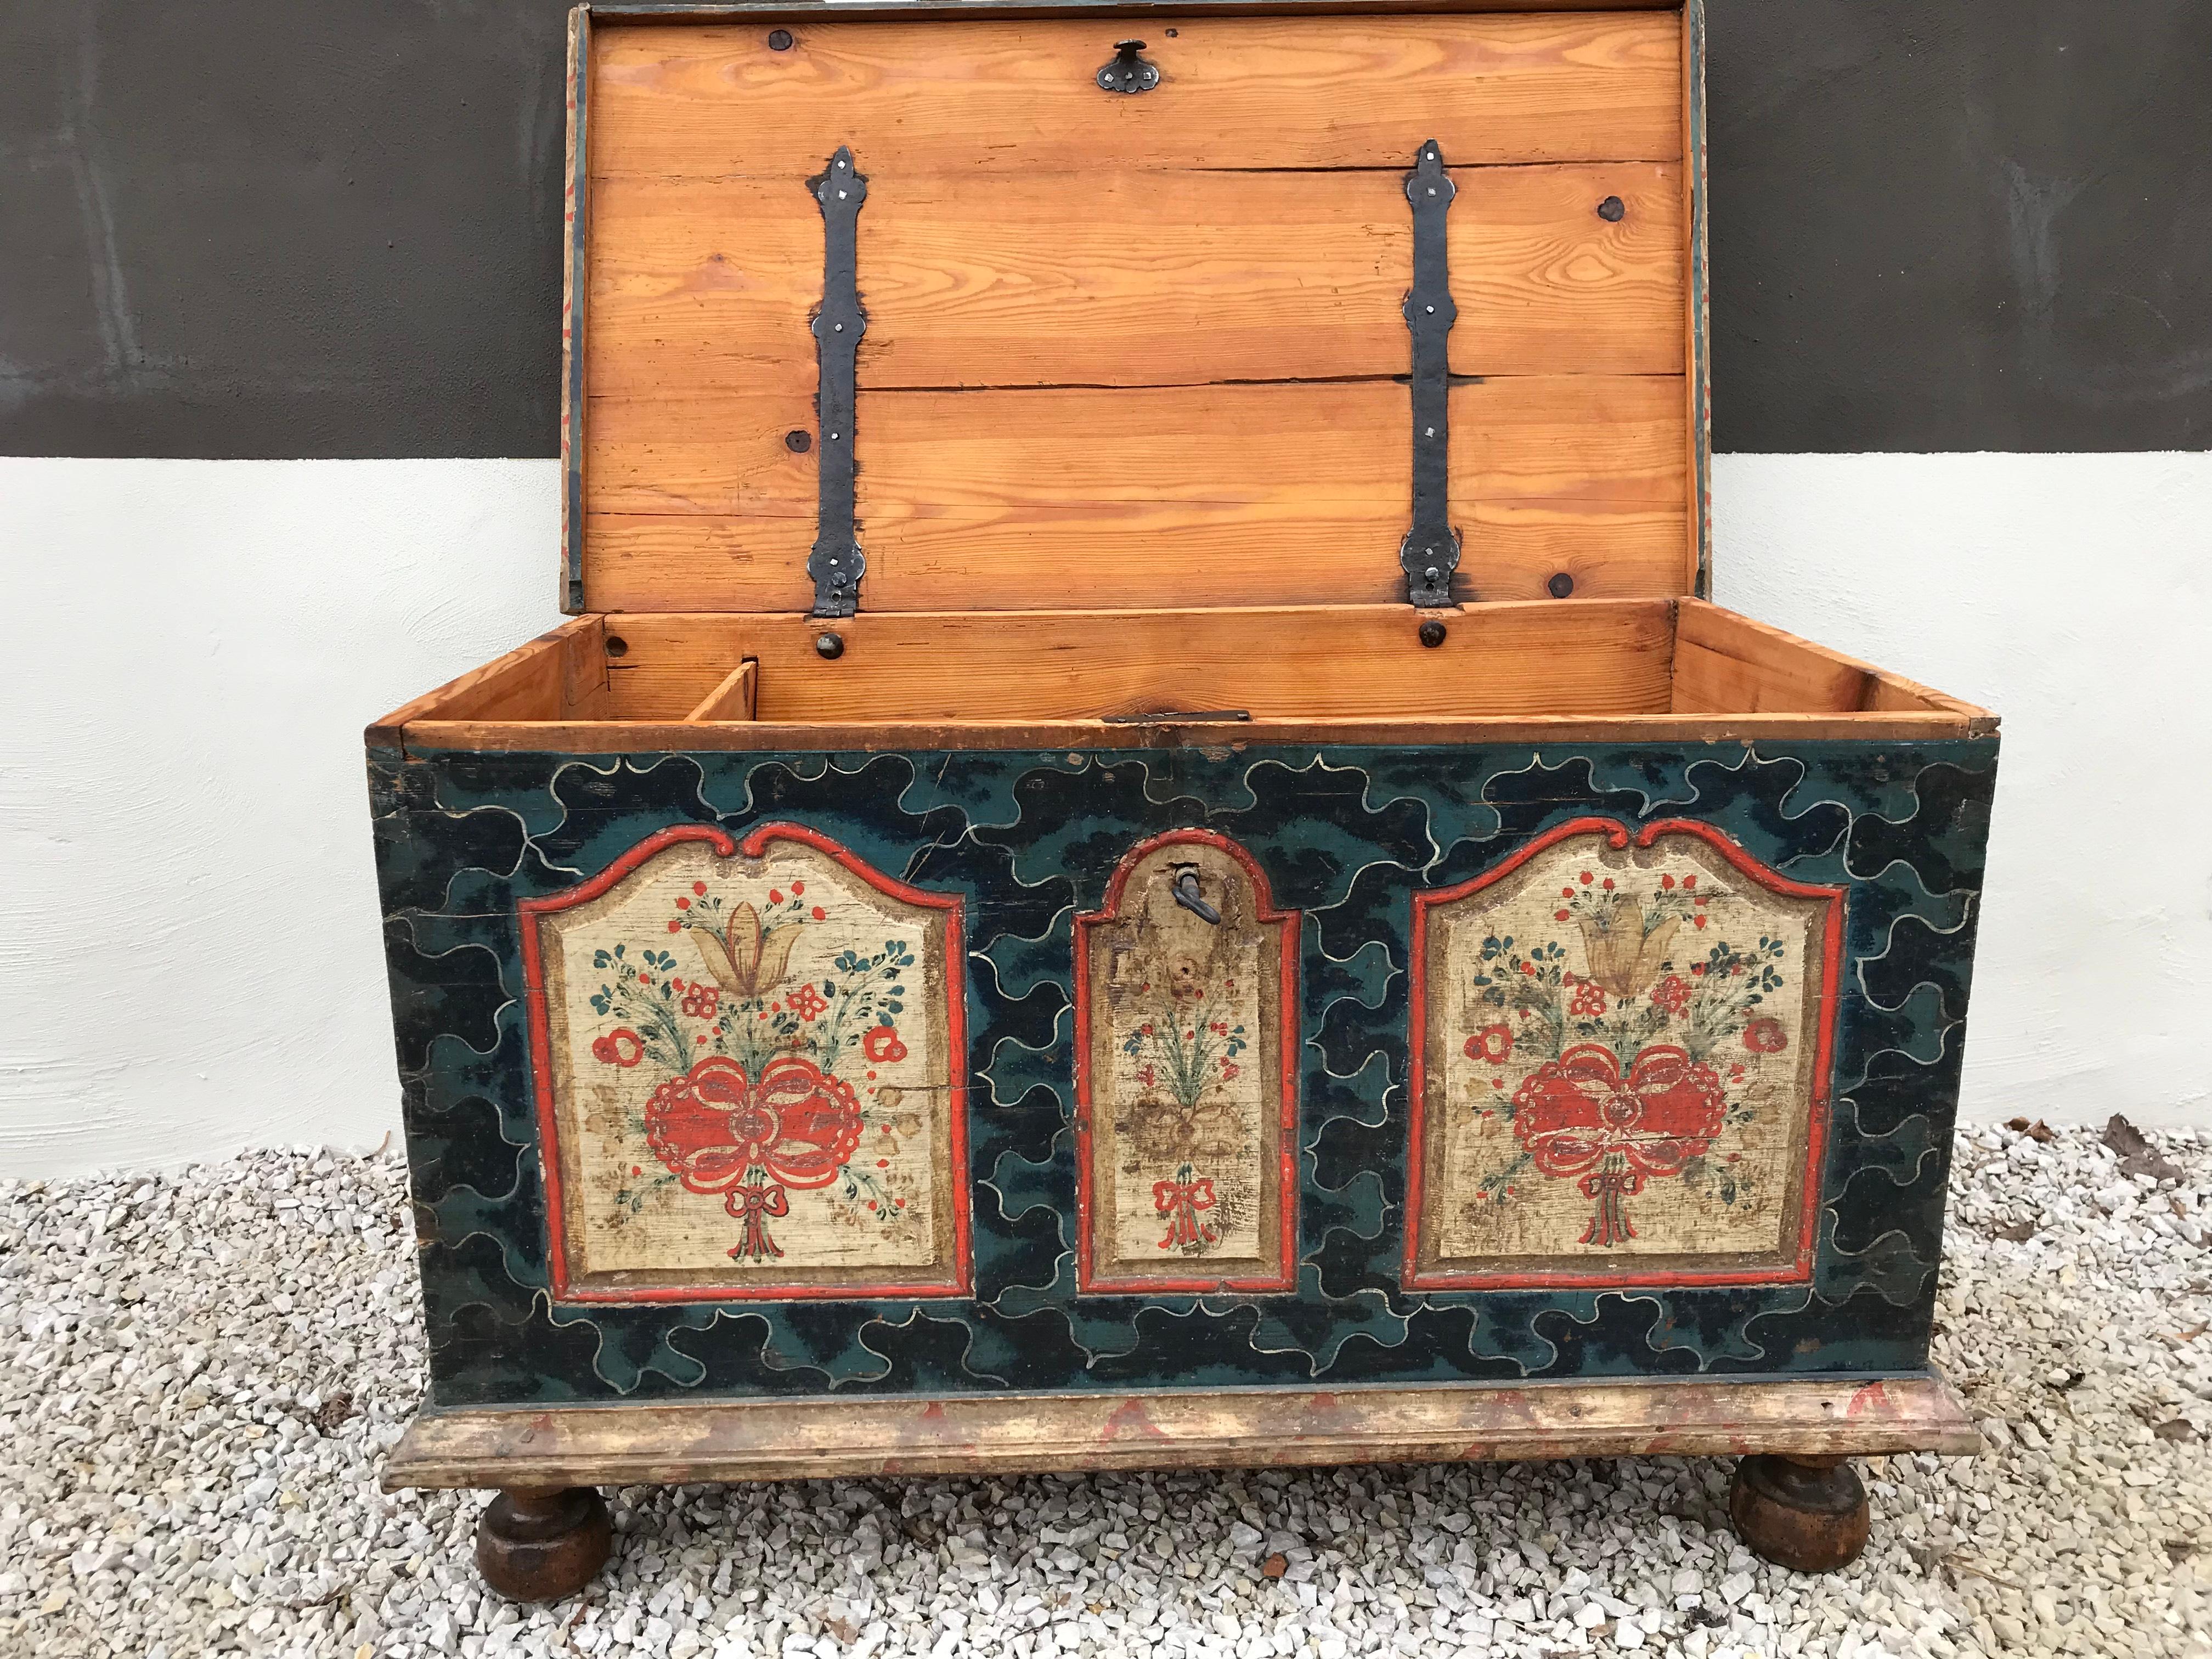 This painted chest comes from the Czech
republic, year 1807.